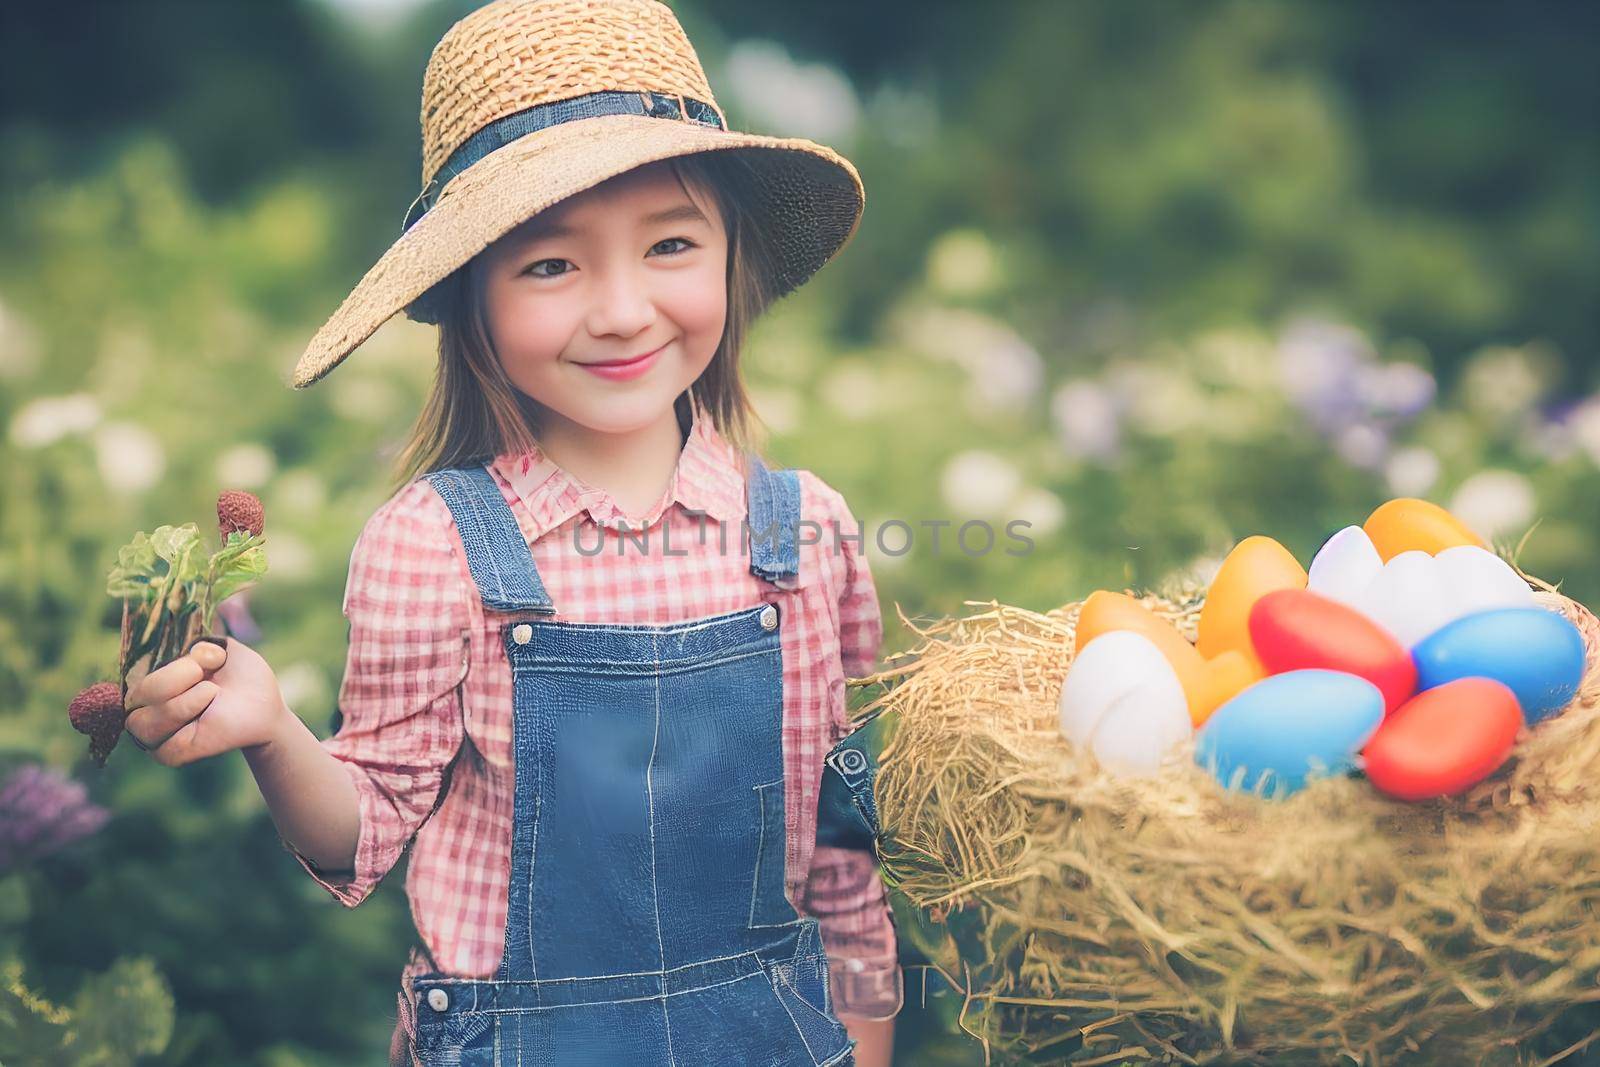 3D render of cute little girl peasant dressed in overalls, checkered shirt, straw hat with farmer gear equipped in garden full of Easter eggs.